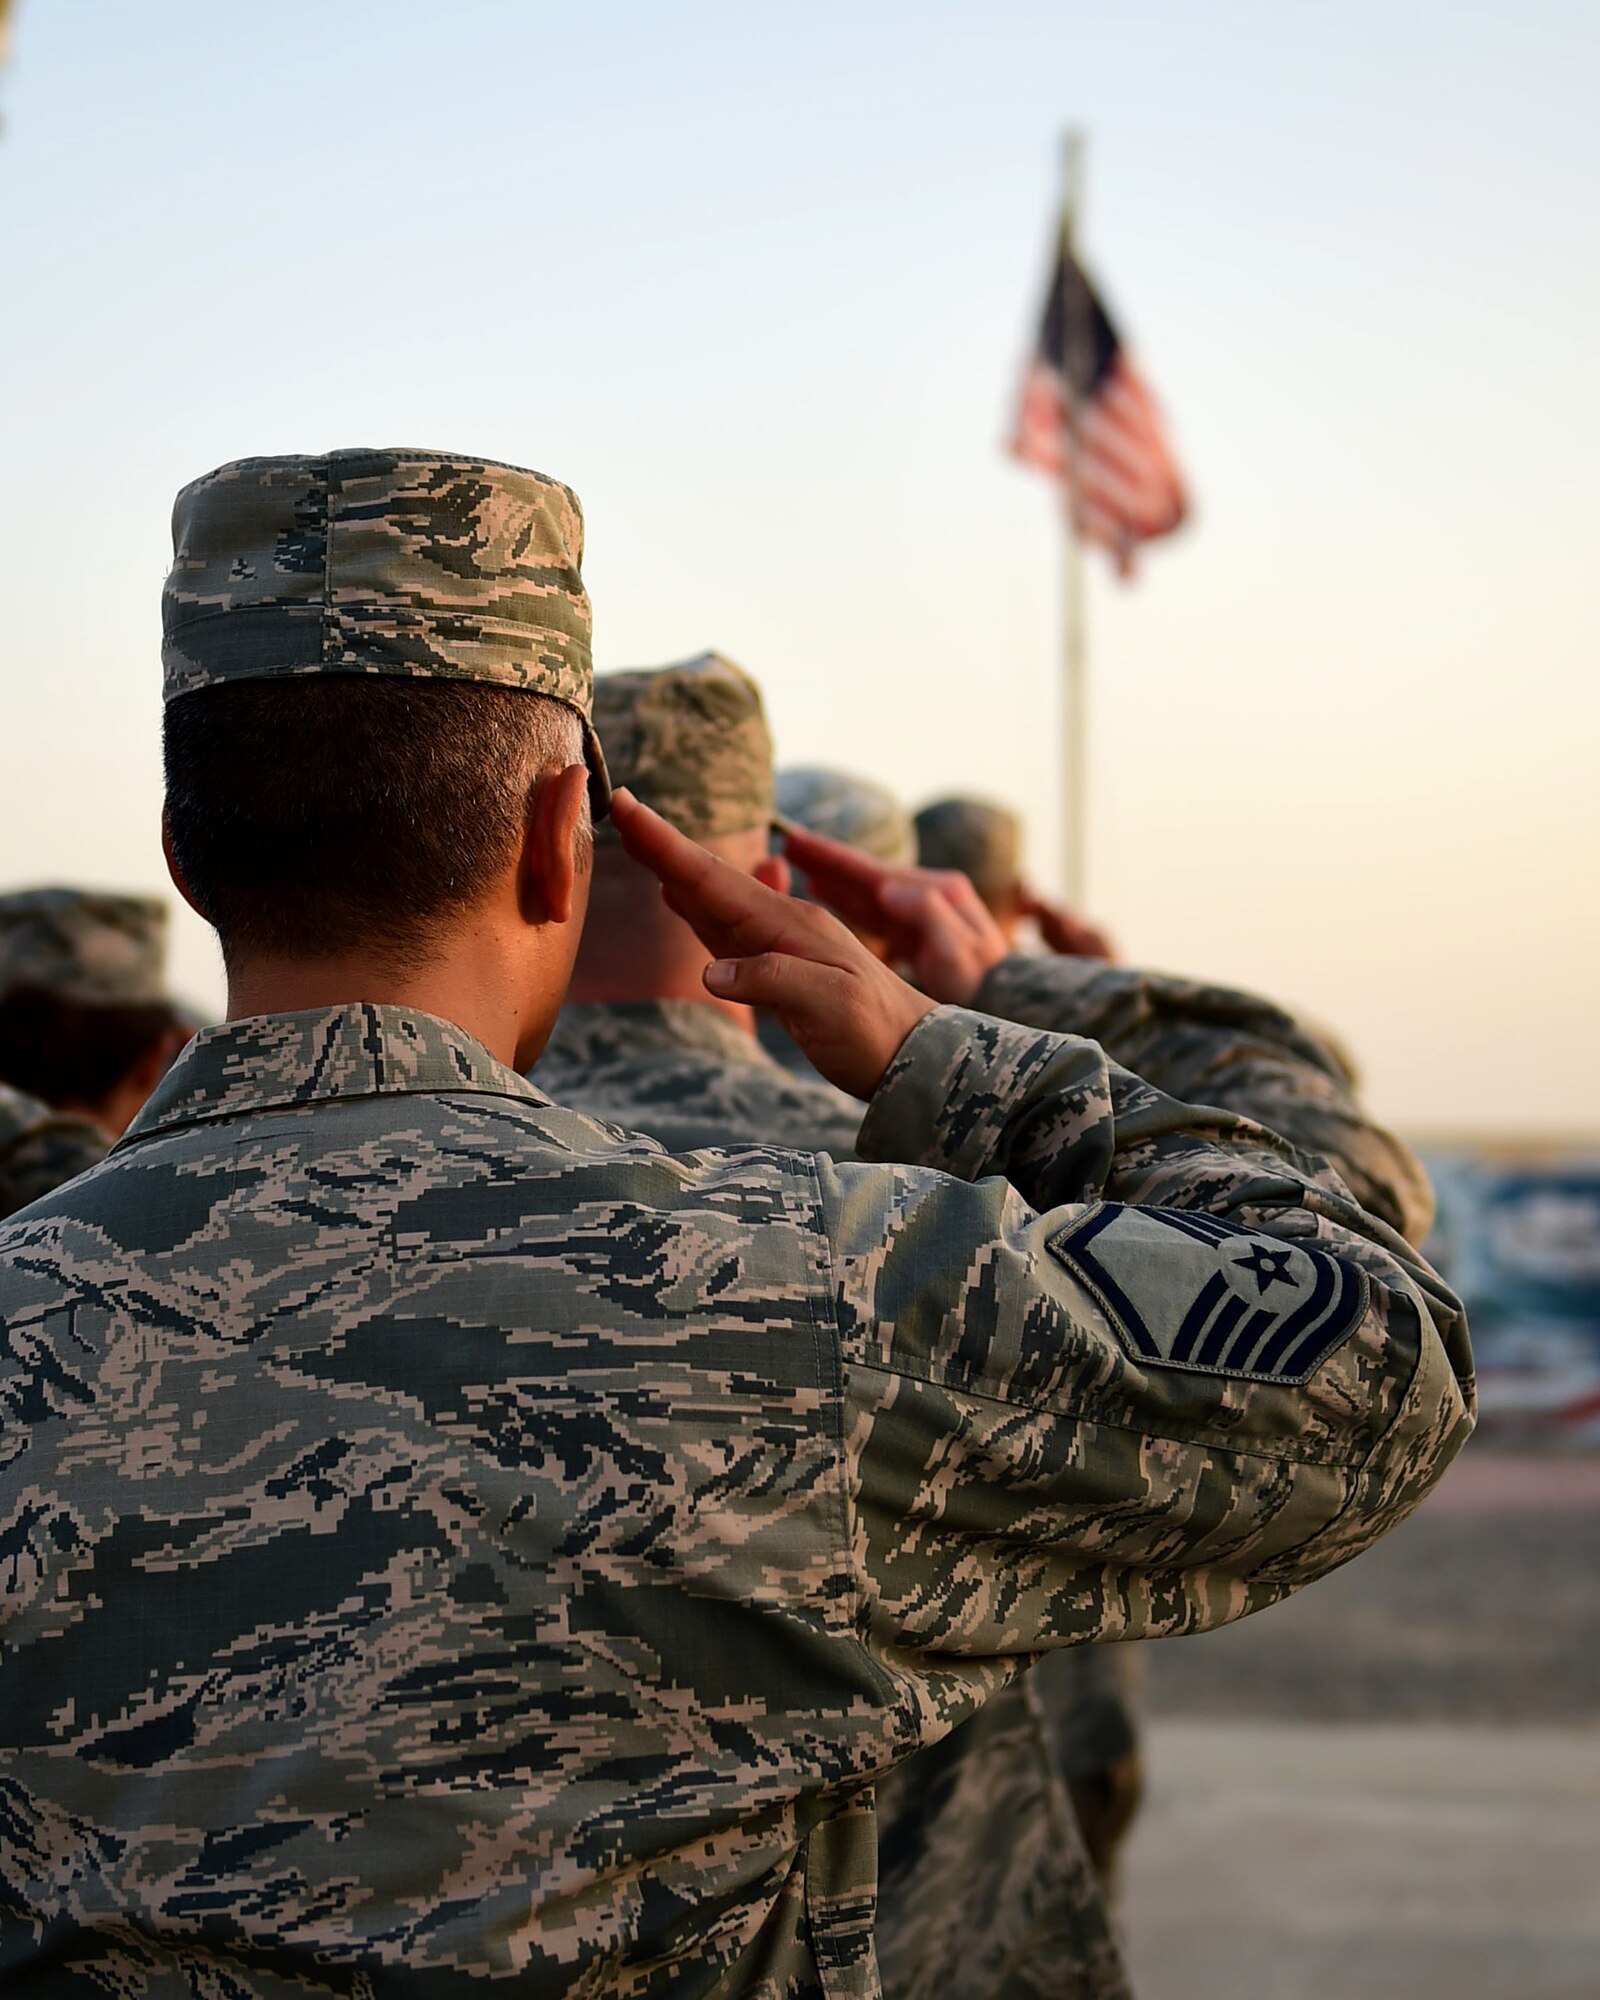 Airmen from the 386th Air Expeditionary Wing salute during the playing of the national anthem at a Veteran’s Day retreat at an undisclosed location in Southwest Asia, Nov. 11, 2015. In addition to the retreat ceremony, the 386th AEW hosted an 11K ruck march and obstacle course challenge. (U.S. Air Force photo by Staff Sgt. Jerilyn Quintanilla)